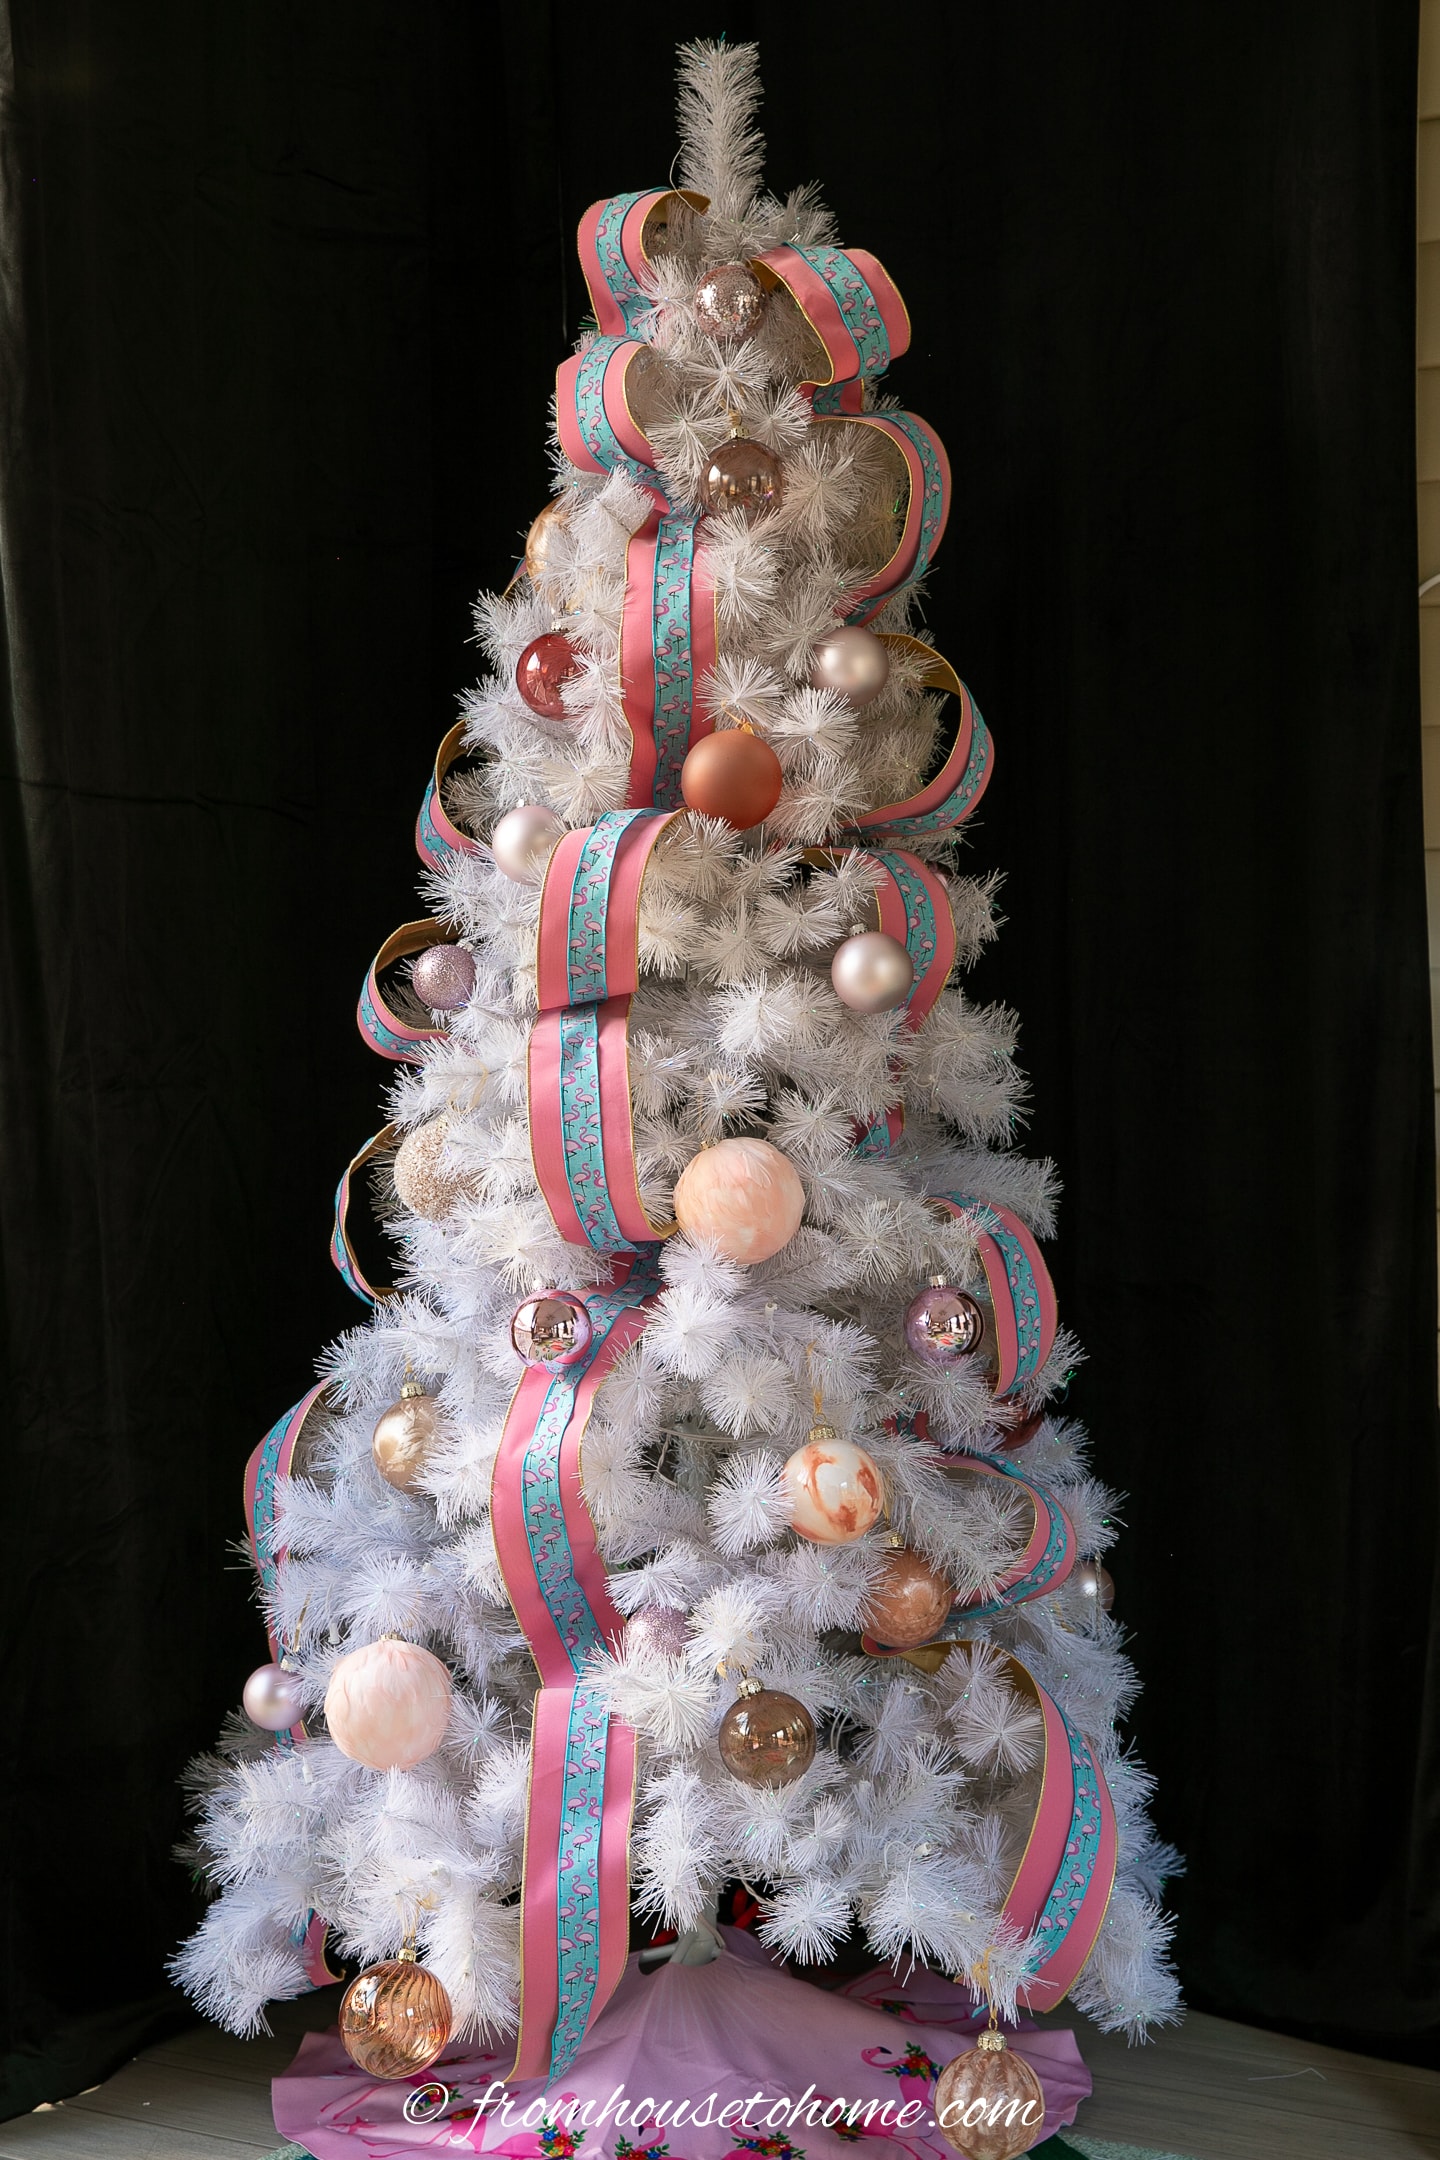 A white Christmas tree decorated with pink ornaments and pink and blue ribbons.